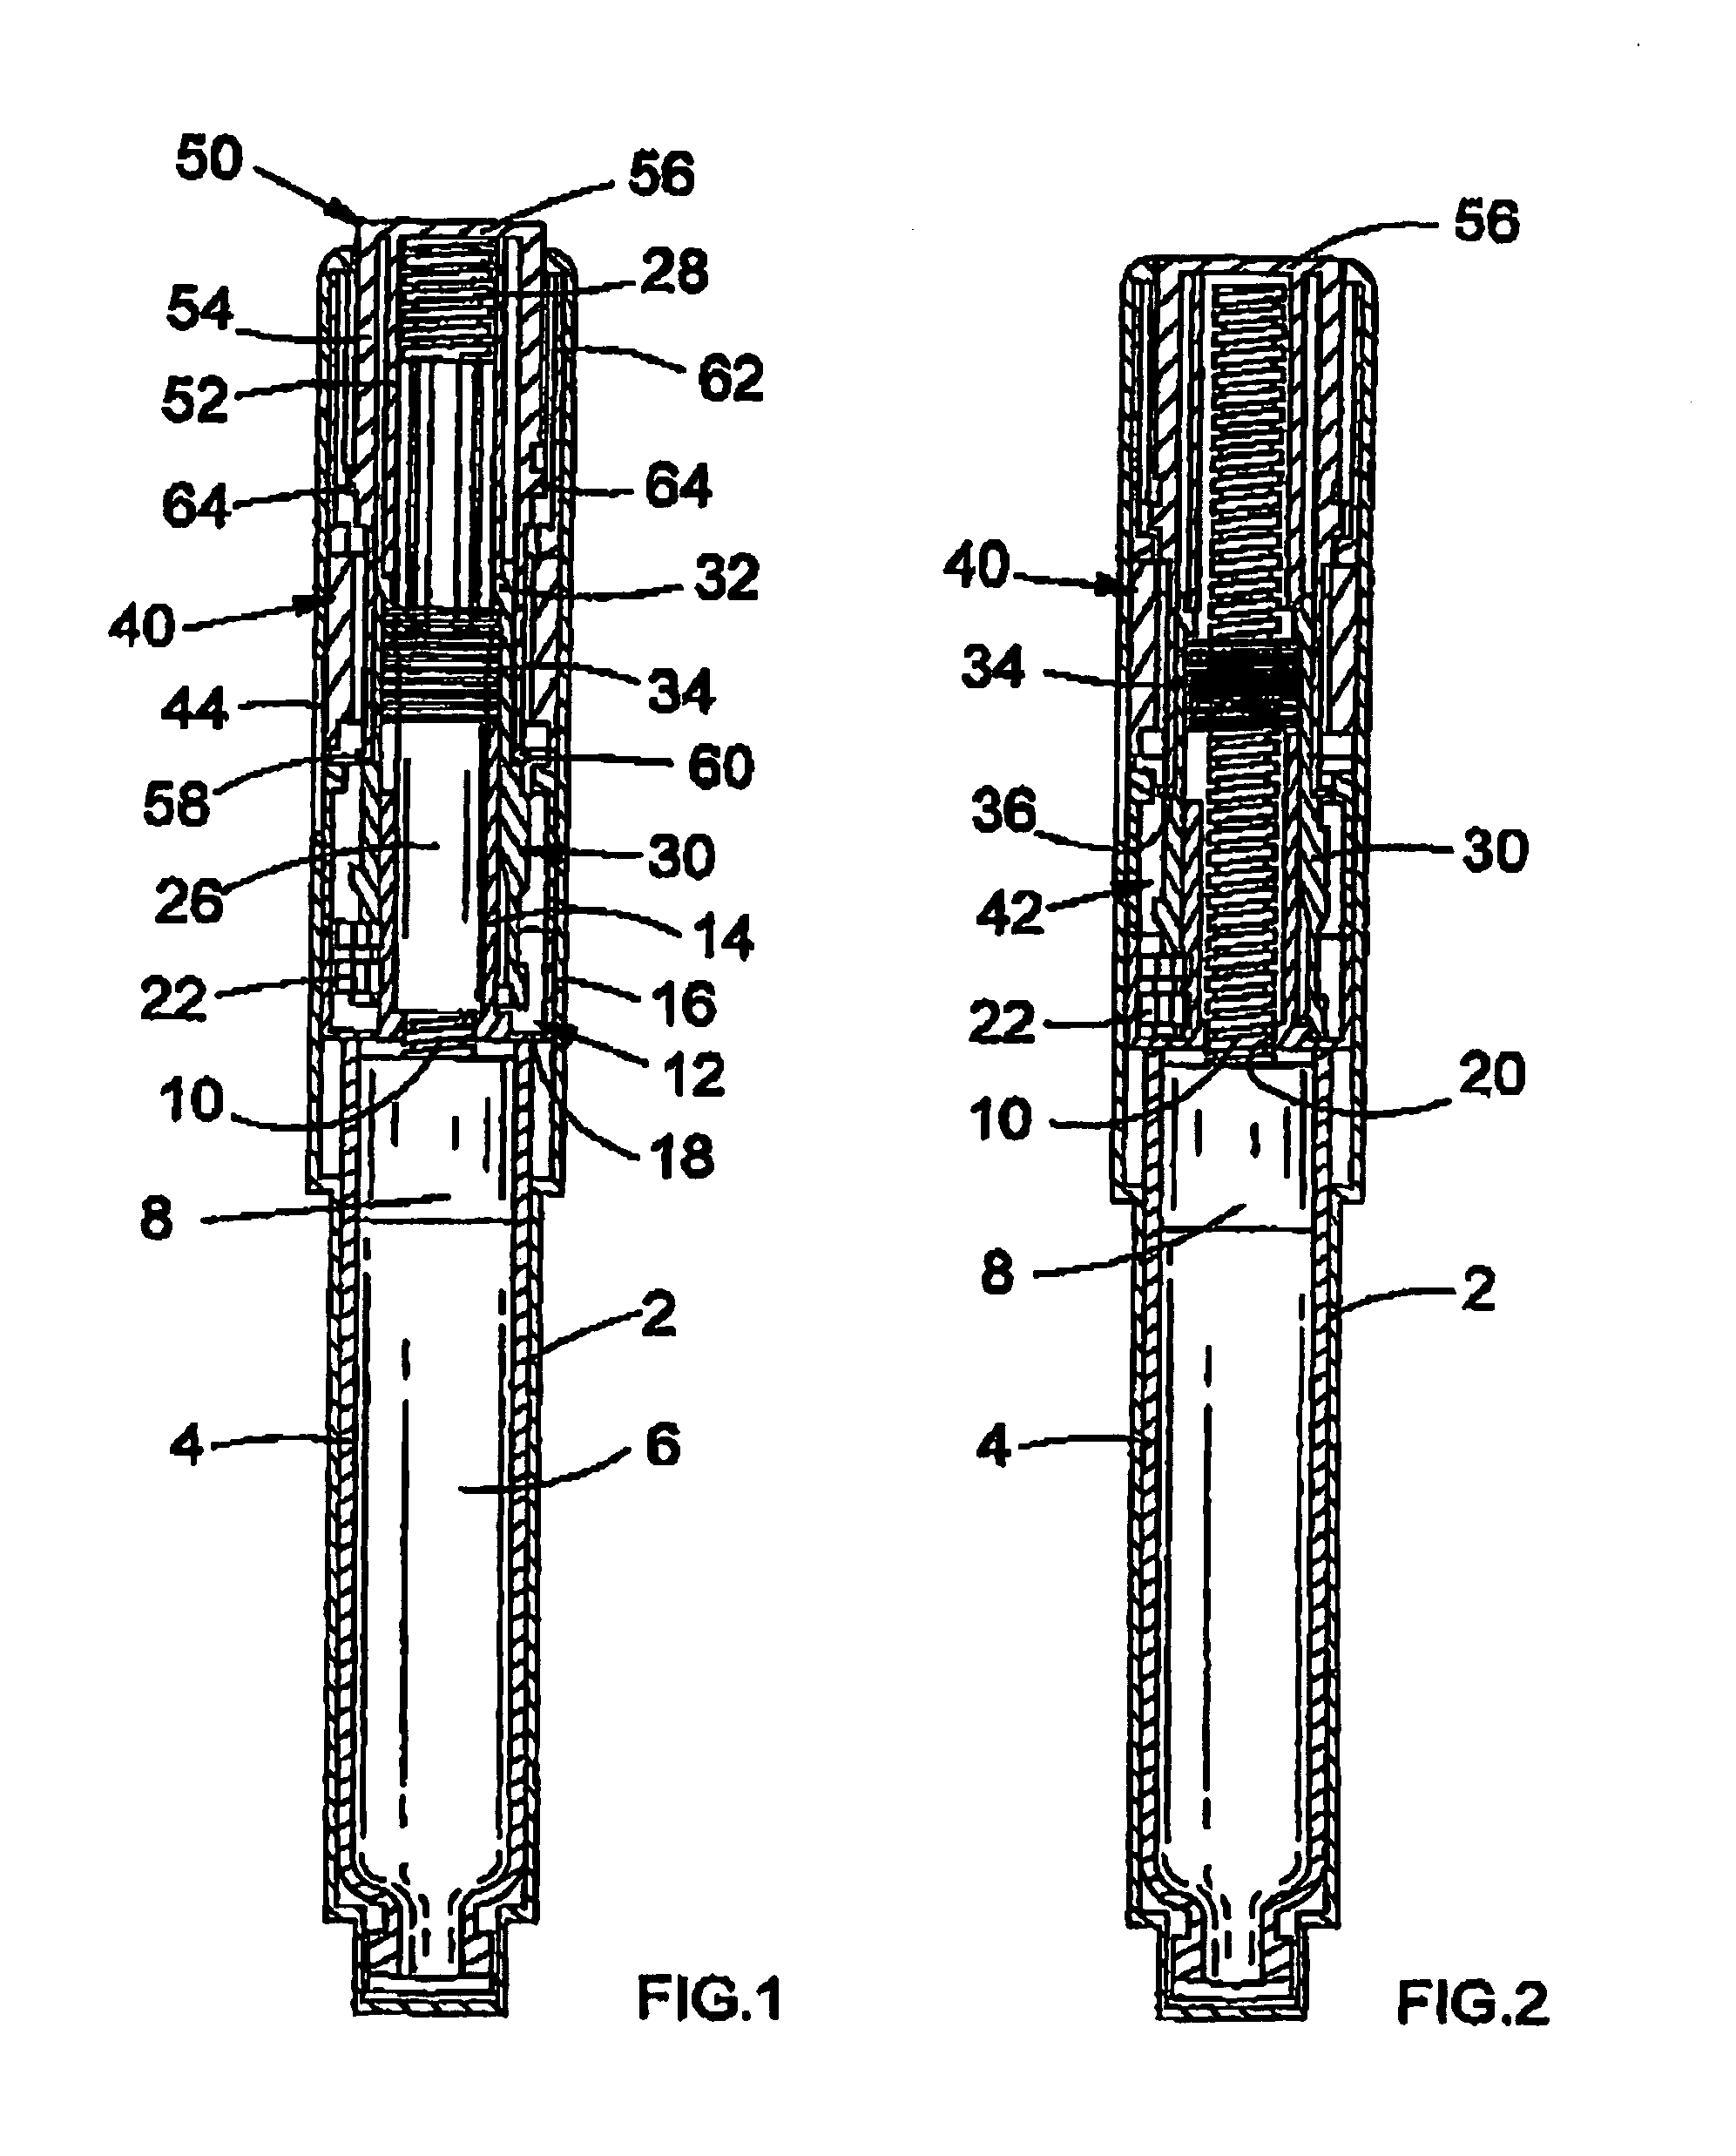 Dose dial and drive mechanisms suitable for use in drug delivery devices